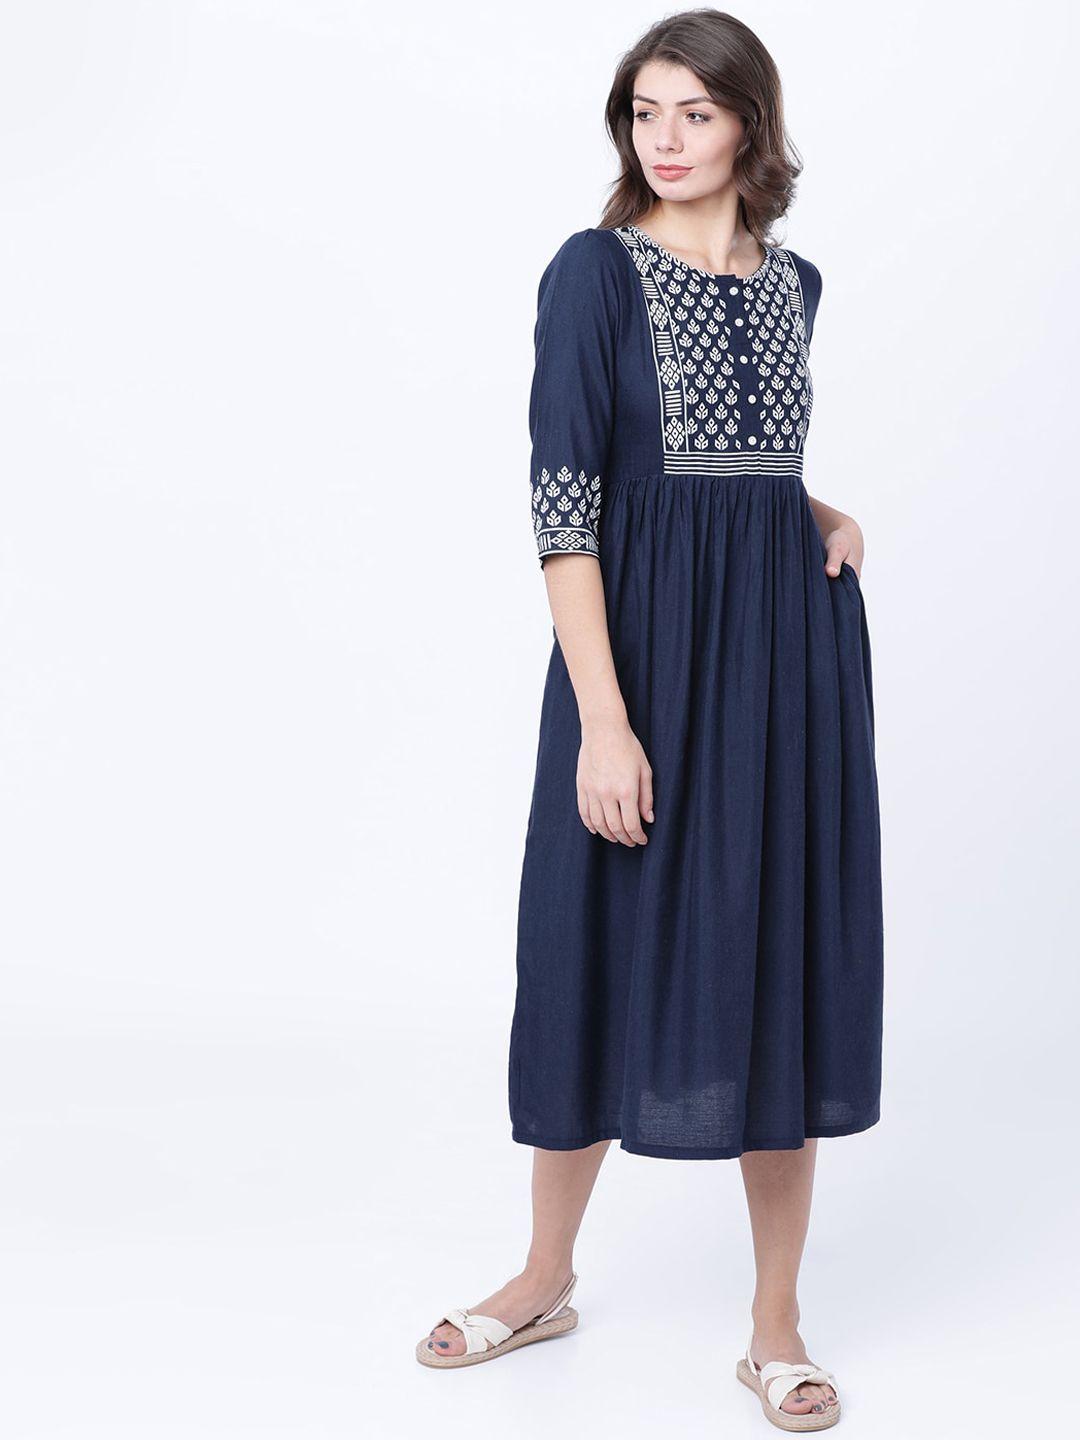 vishudh-women-navy-blue-printed-fit-and-flare-dress